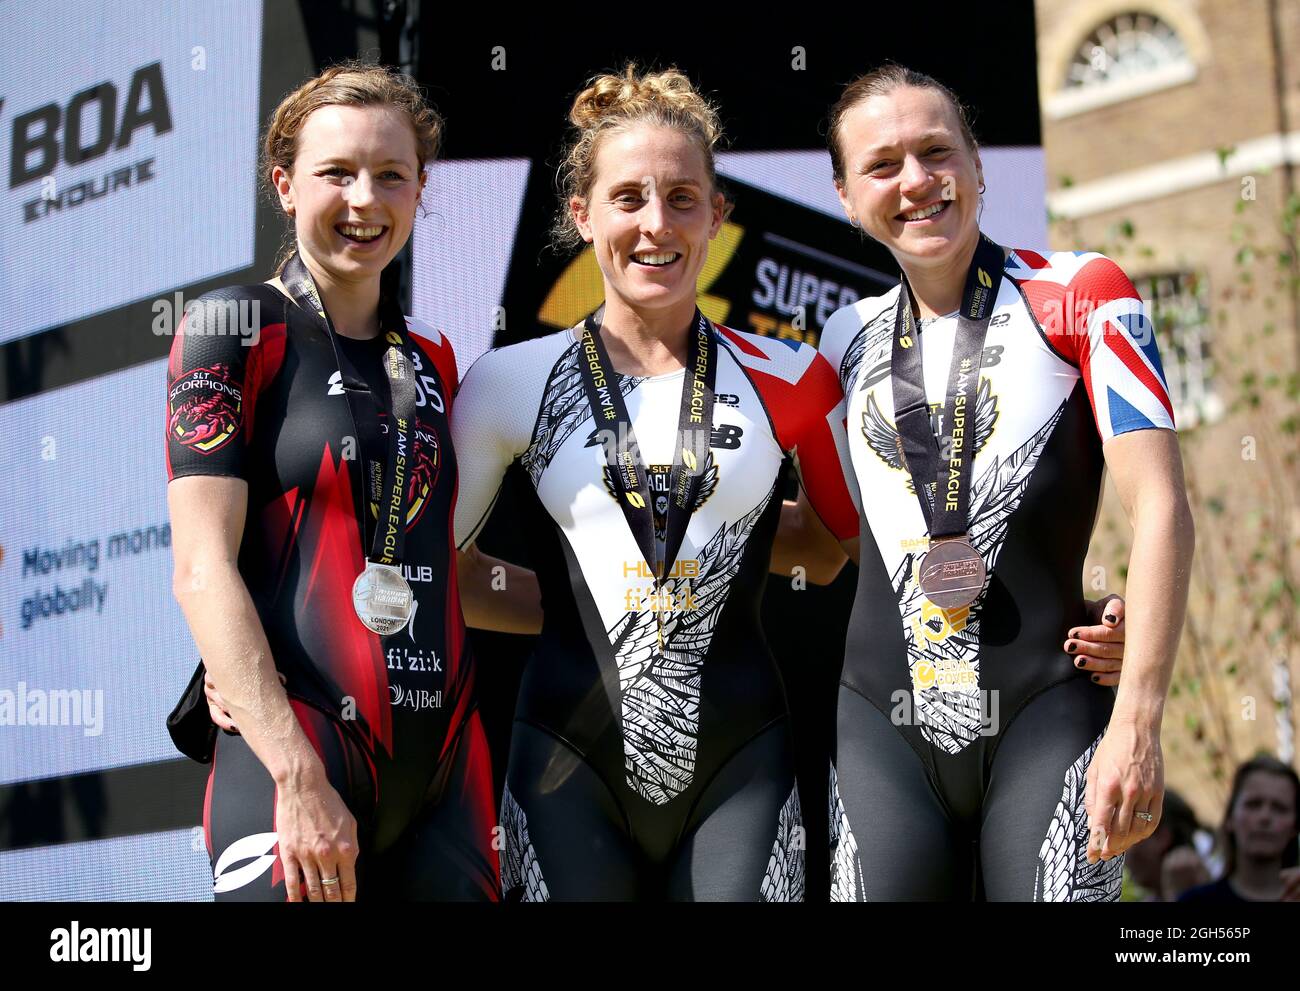 Eagles' Jessica Learmonth (centre) poses with her gold medal after winning the women's race alongside second placed Scorpions' Georgia Taylor-Brown (left) and third placed Eagles' Vicky Holland during the Super League Triathlon Championship 2021 in London. Picture date: Sunday September 5, 2021. Stock Photo